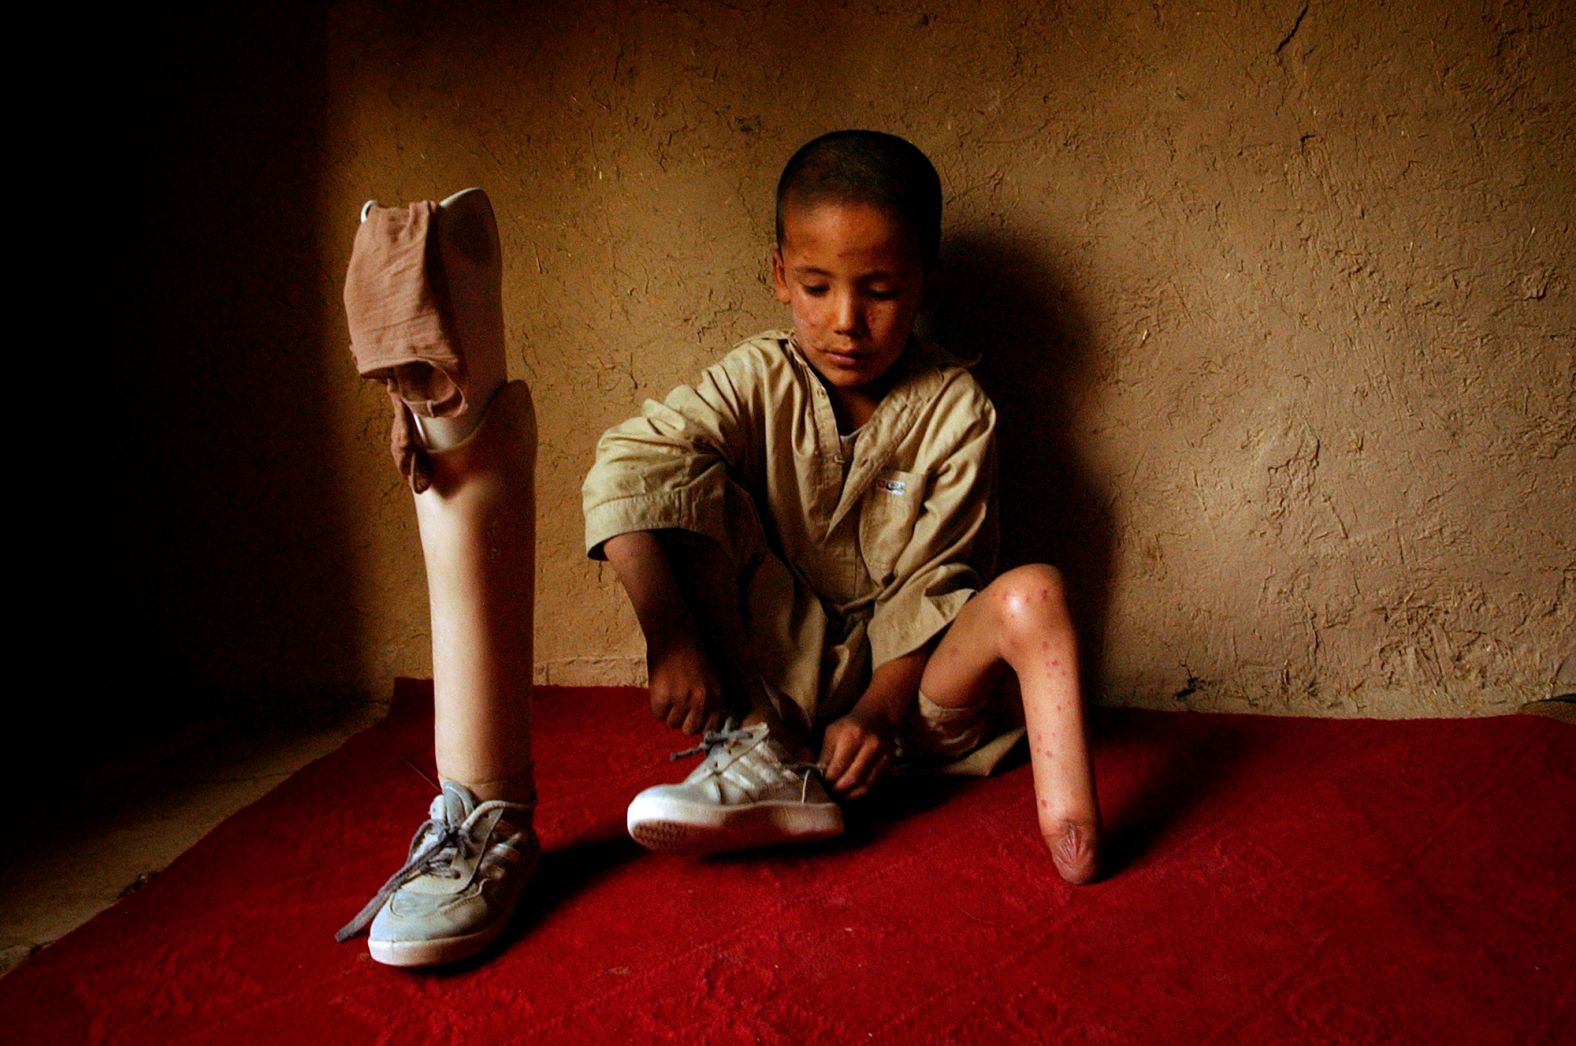 Mohammaed Mahdi, who lost his foot in a mine explosion, waits for a Red Cross doctor at his home in Kabul in August 2004. This photo was taken by Associated Press photographer Emilio Morenatti, who five years later lost part of his leg when the armored vehicle he was in hit a roadside bomb.